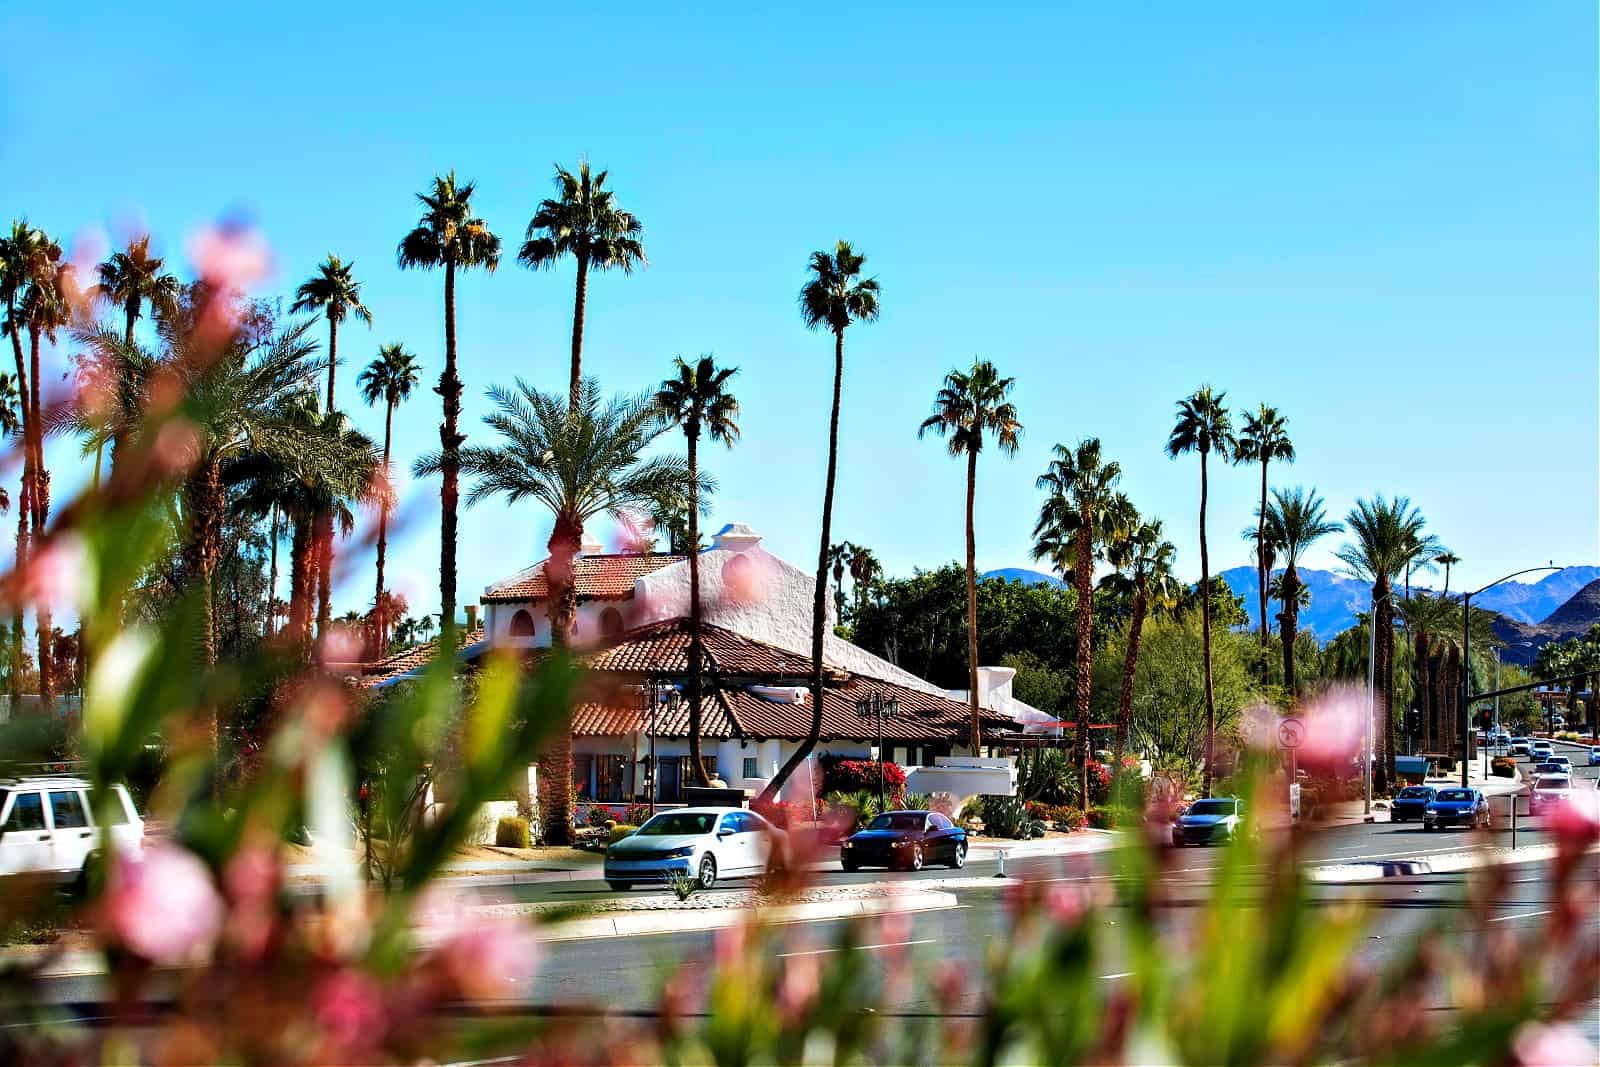 Flower and palm framed view of the downtown area of Rancho Mirage, California, USA.